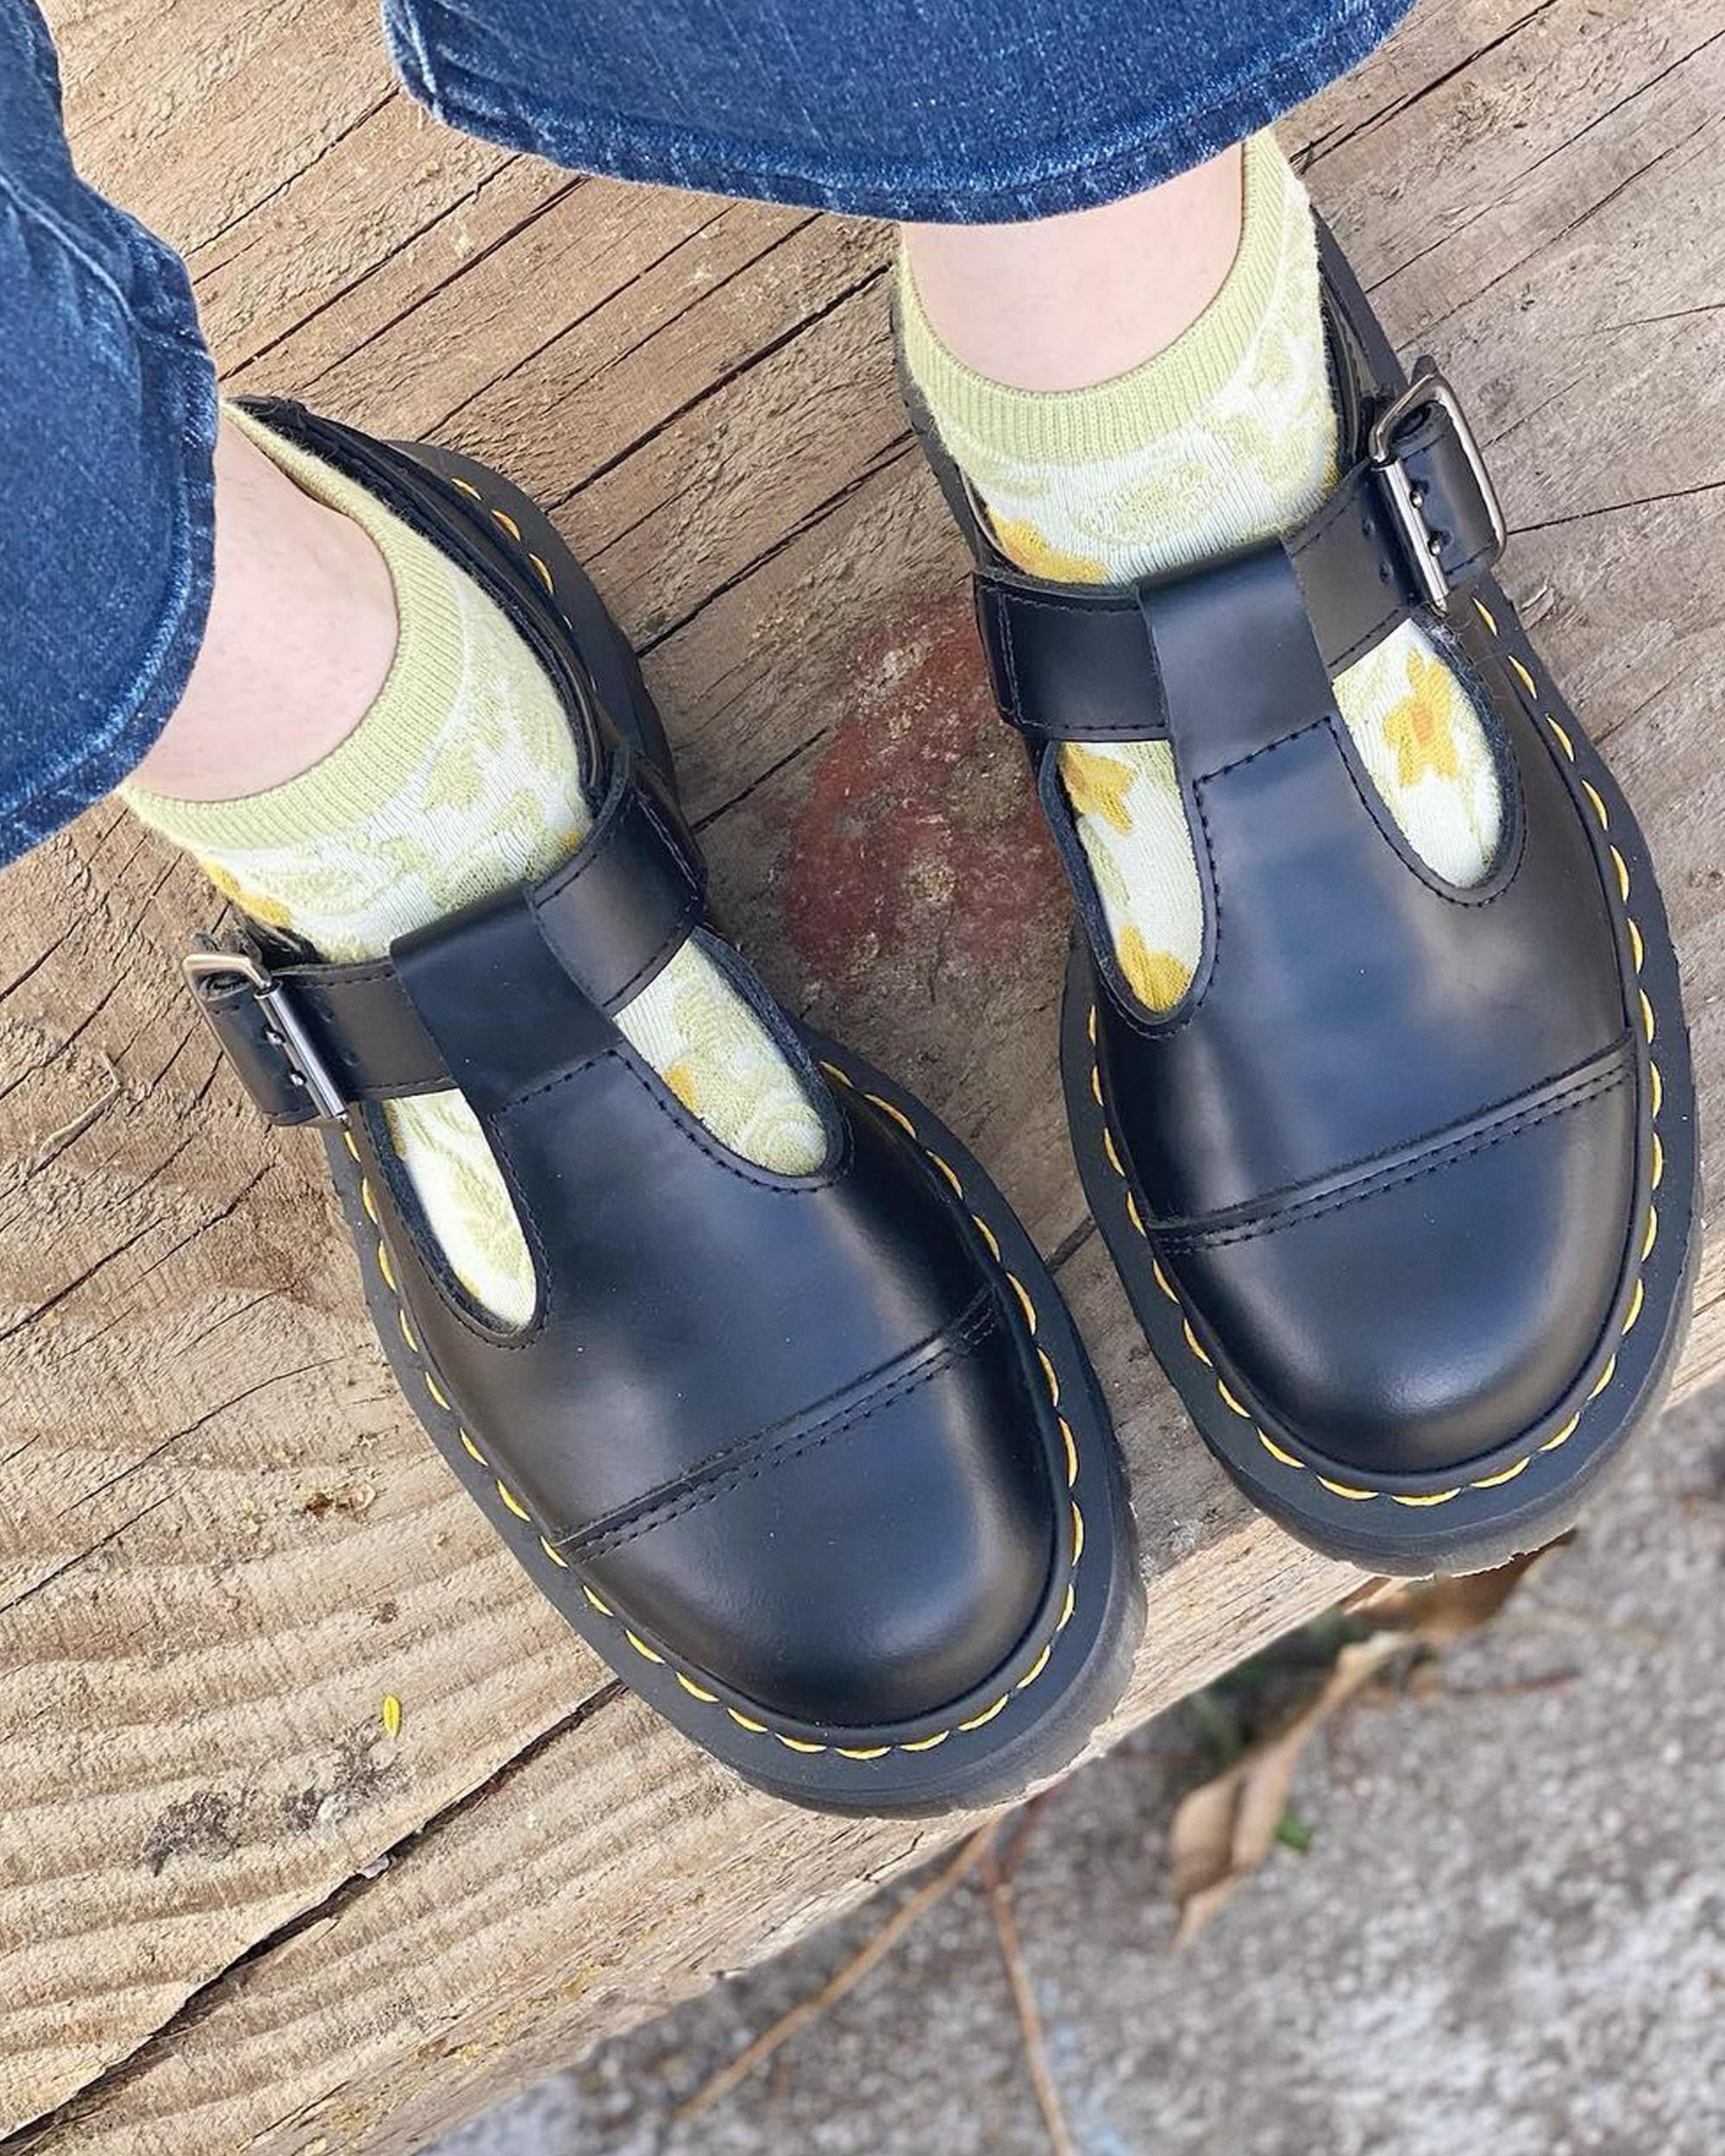 Bethan Smooth Leather Platform Mary Jane ShoesBethan Smooth Leather Platform Mary Jane Shoes Dr. Martens